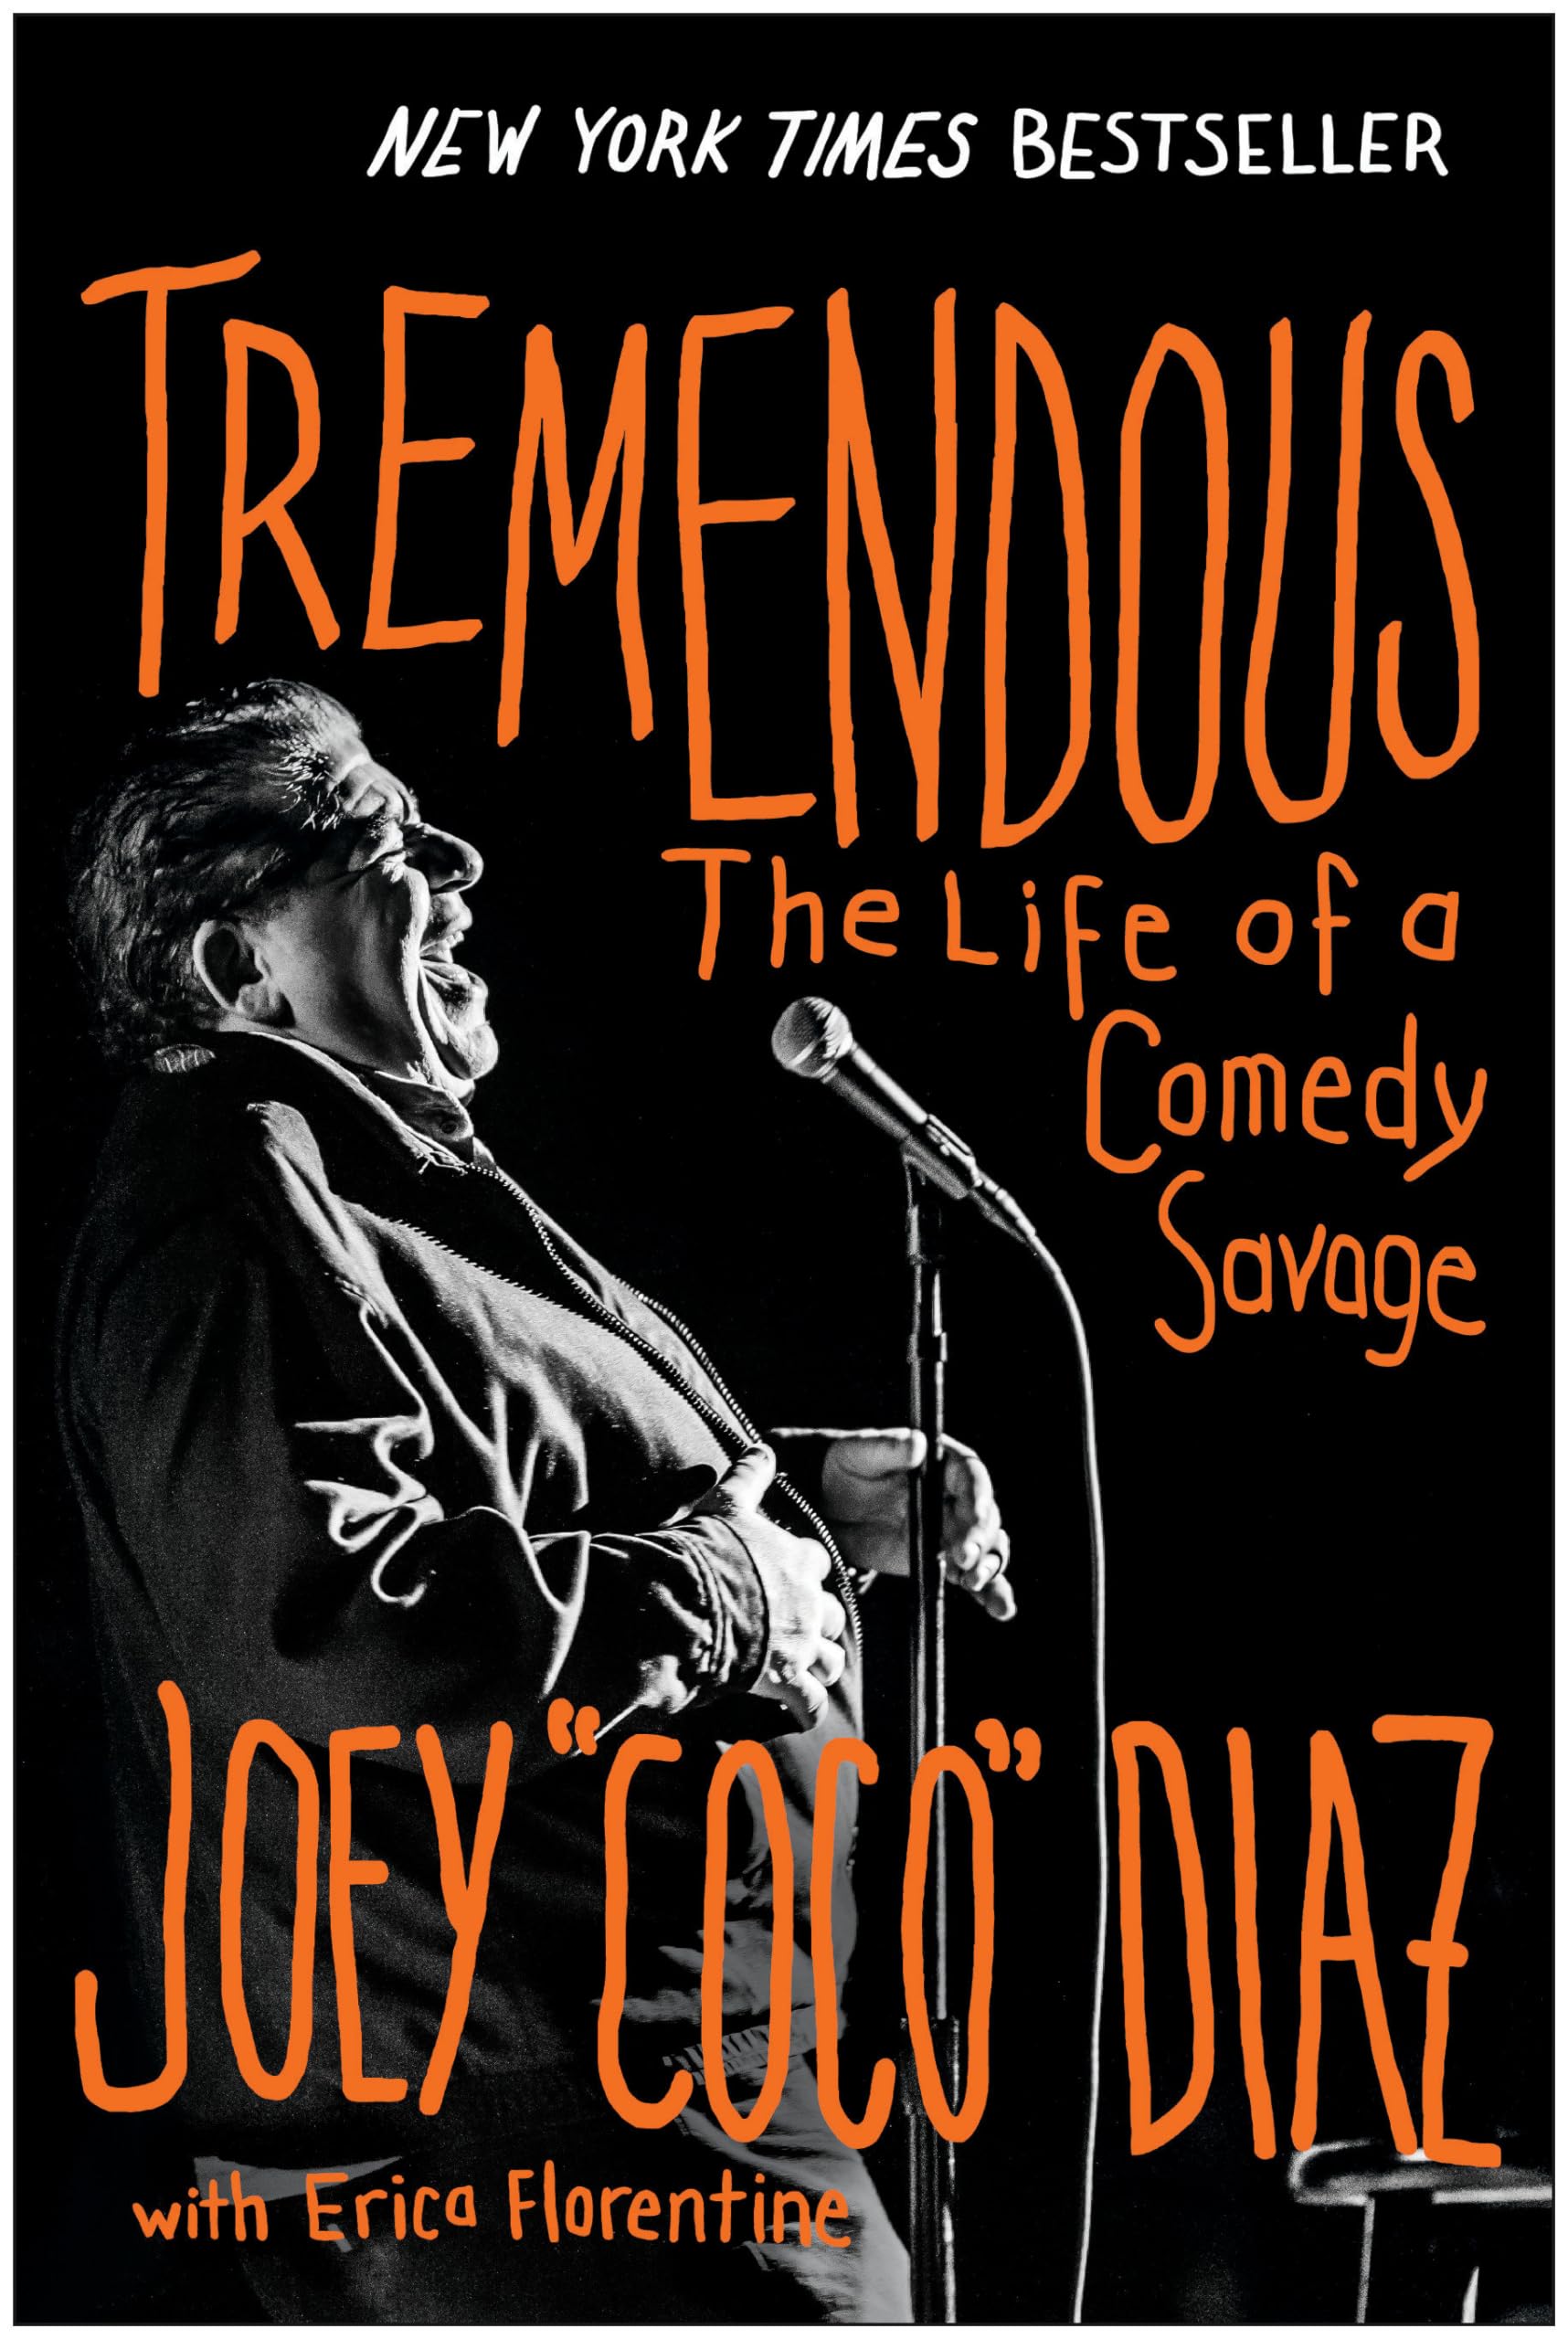 Tremendous: The Life of a Comedy Savage by Diaz, Joey